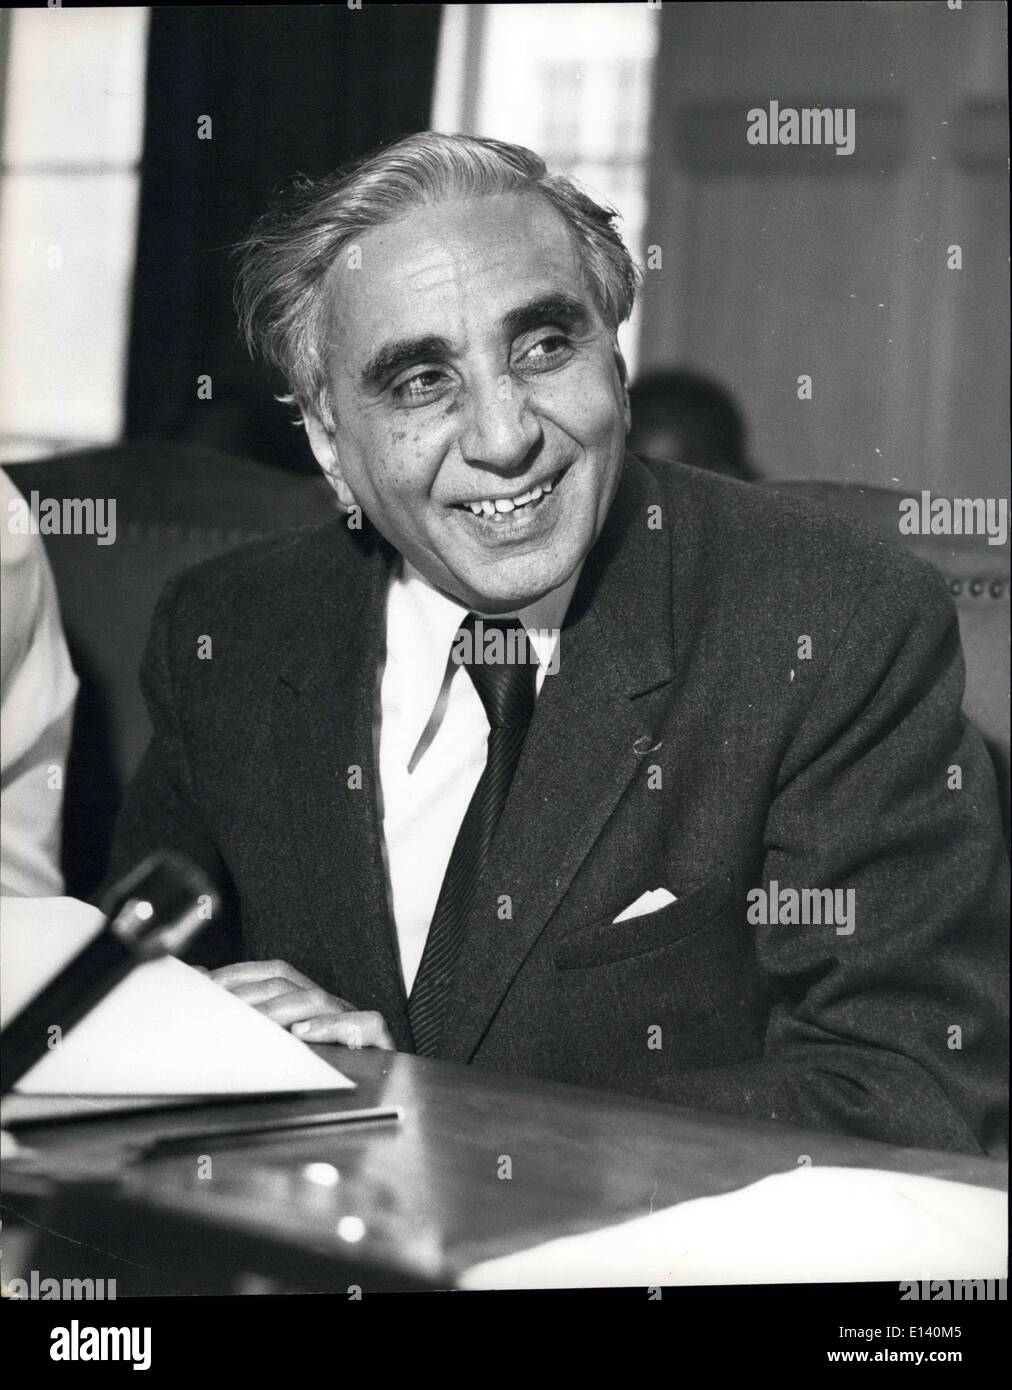 Mar. 31, 2012 - Tanzania: Jamal: Amir Habib Jamal, Minister for Commerce and Industry. Born 1922. Minister with various portfolios since 1959. Stock Photo